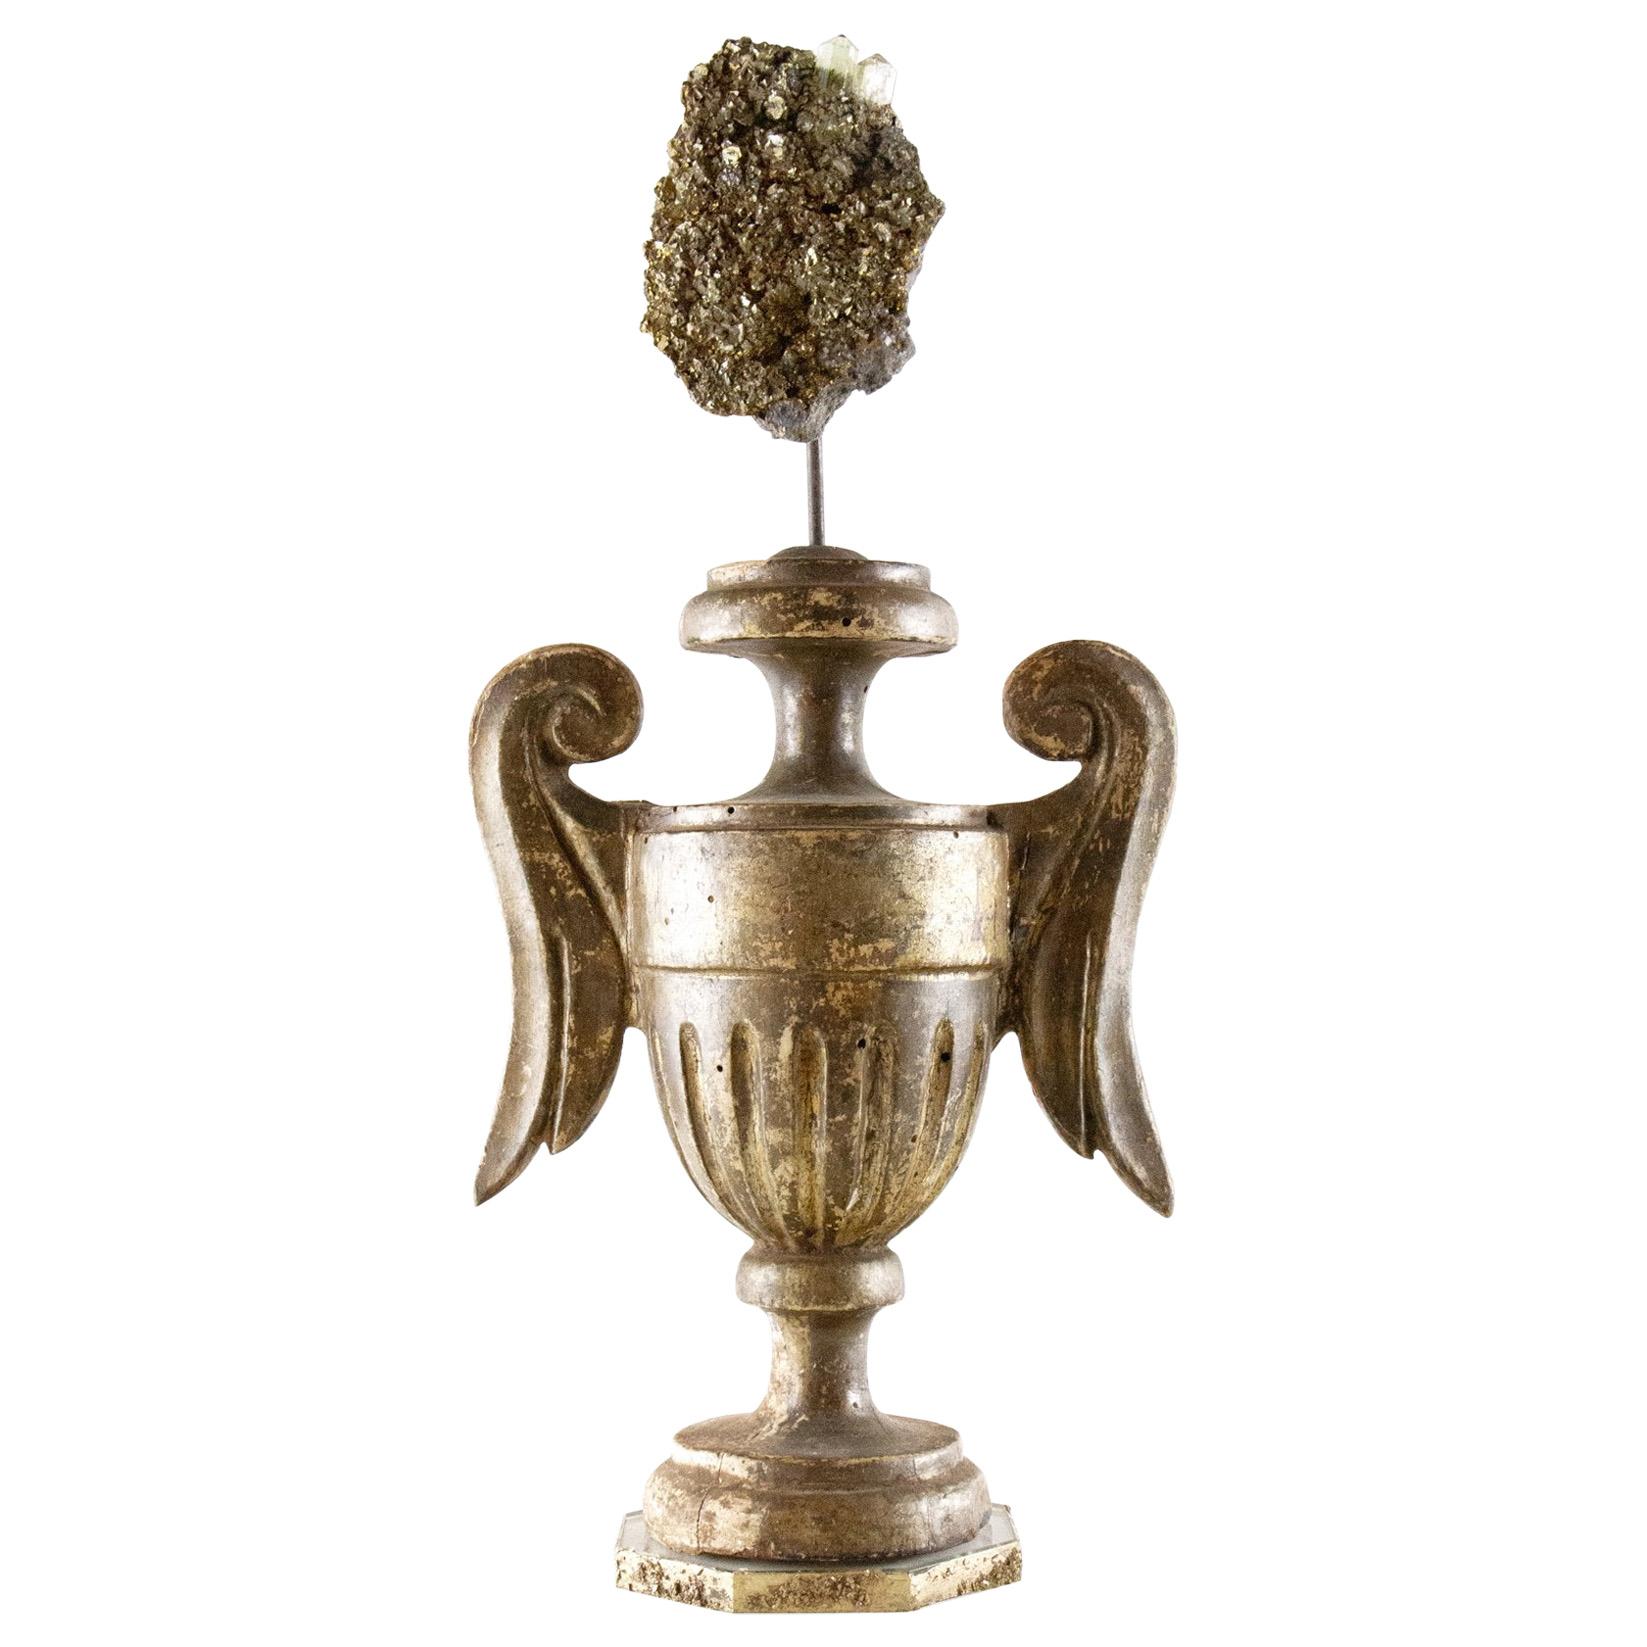 18th Century Italian Mecca Vase with Pyrite and Peridot Points